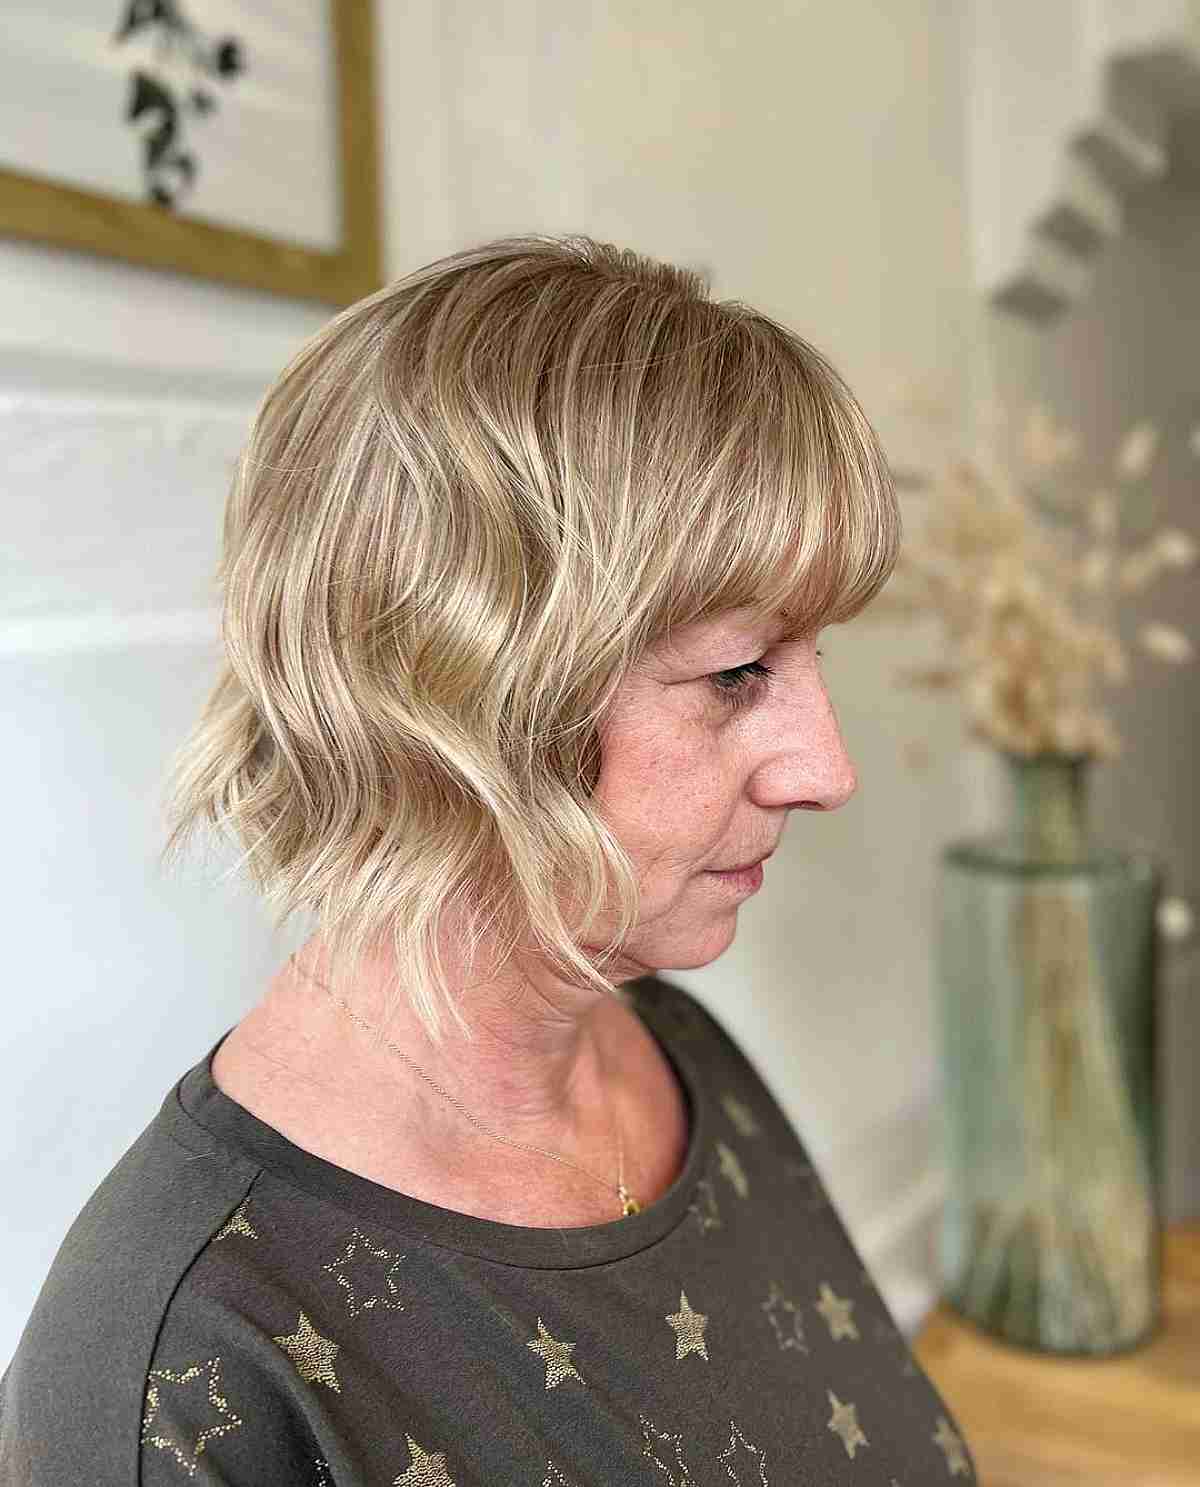 Jagged Ends and Full Bangs for Older Women with Short Hair